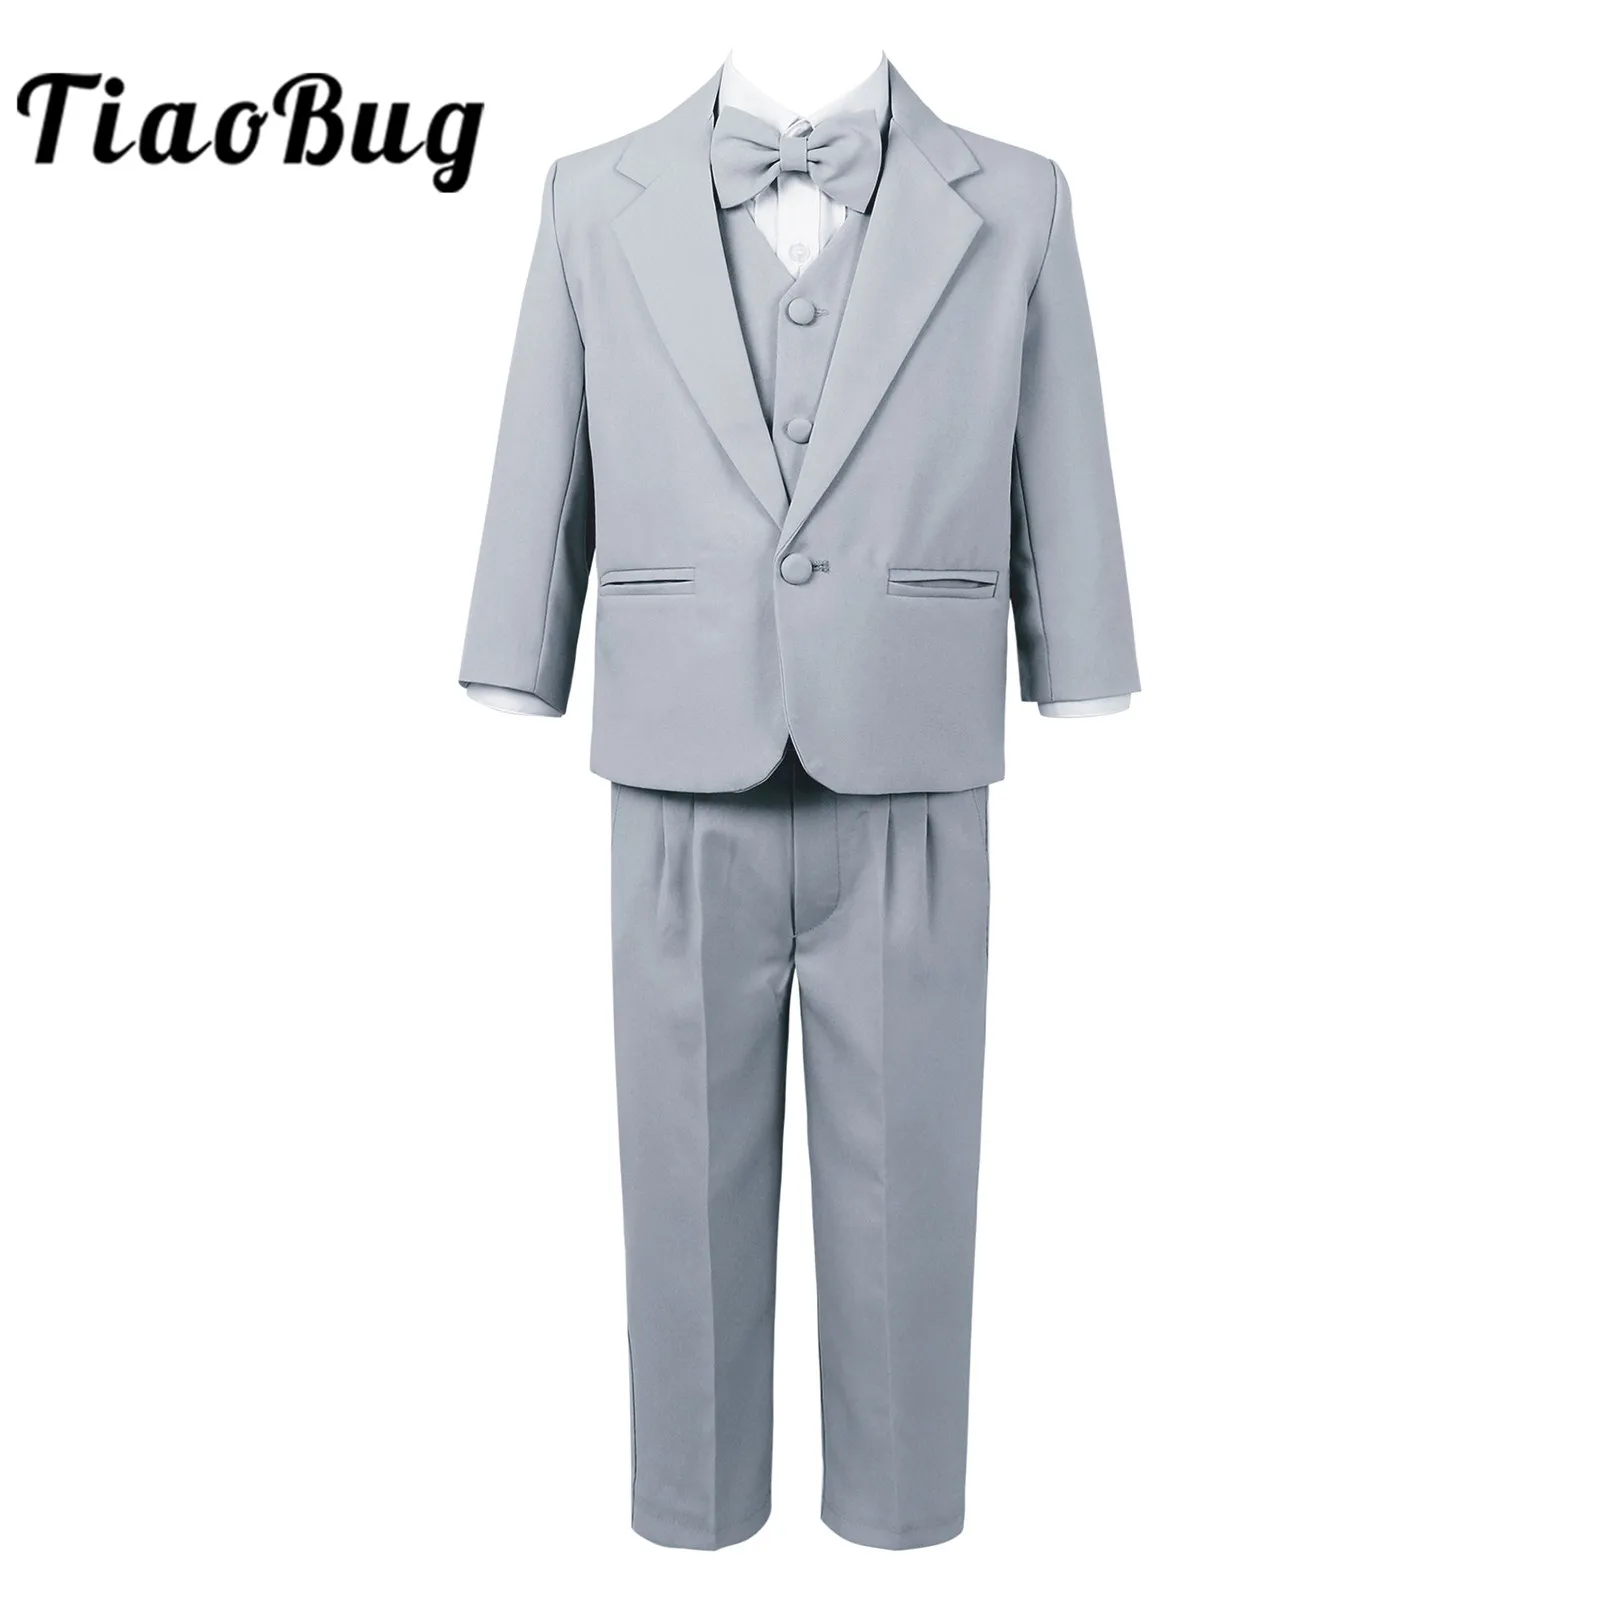 Boys Formal Suit Set Toddler Wedding Party Outfit Kids Infant Cute Gentleman  Tuxedo Birthday Clothing Buy Boy Gentleman,Gentleman Suit Boy,English Gentleman  Outfit Product On | Baby Boys Formal Suit Gentleman Wedding Tuxedo